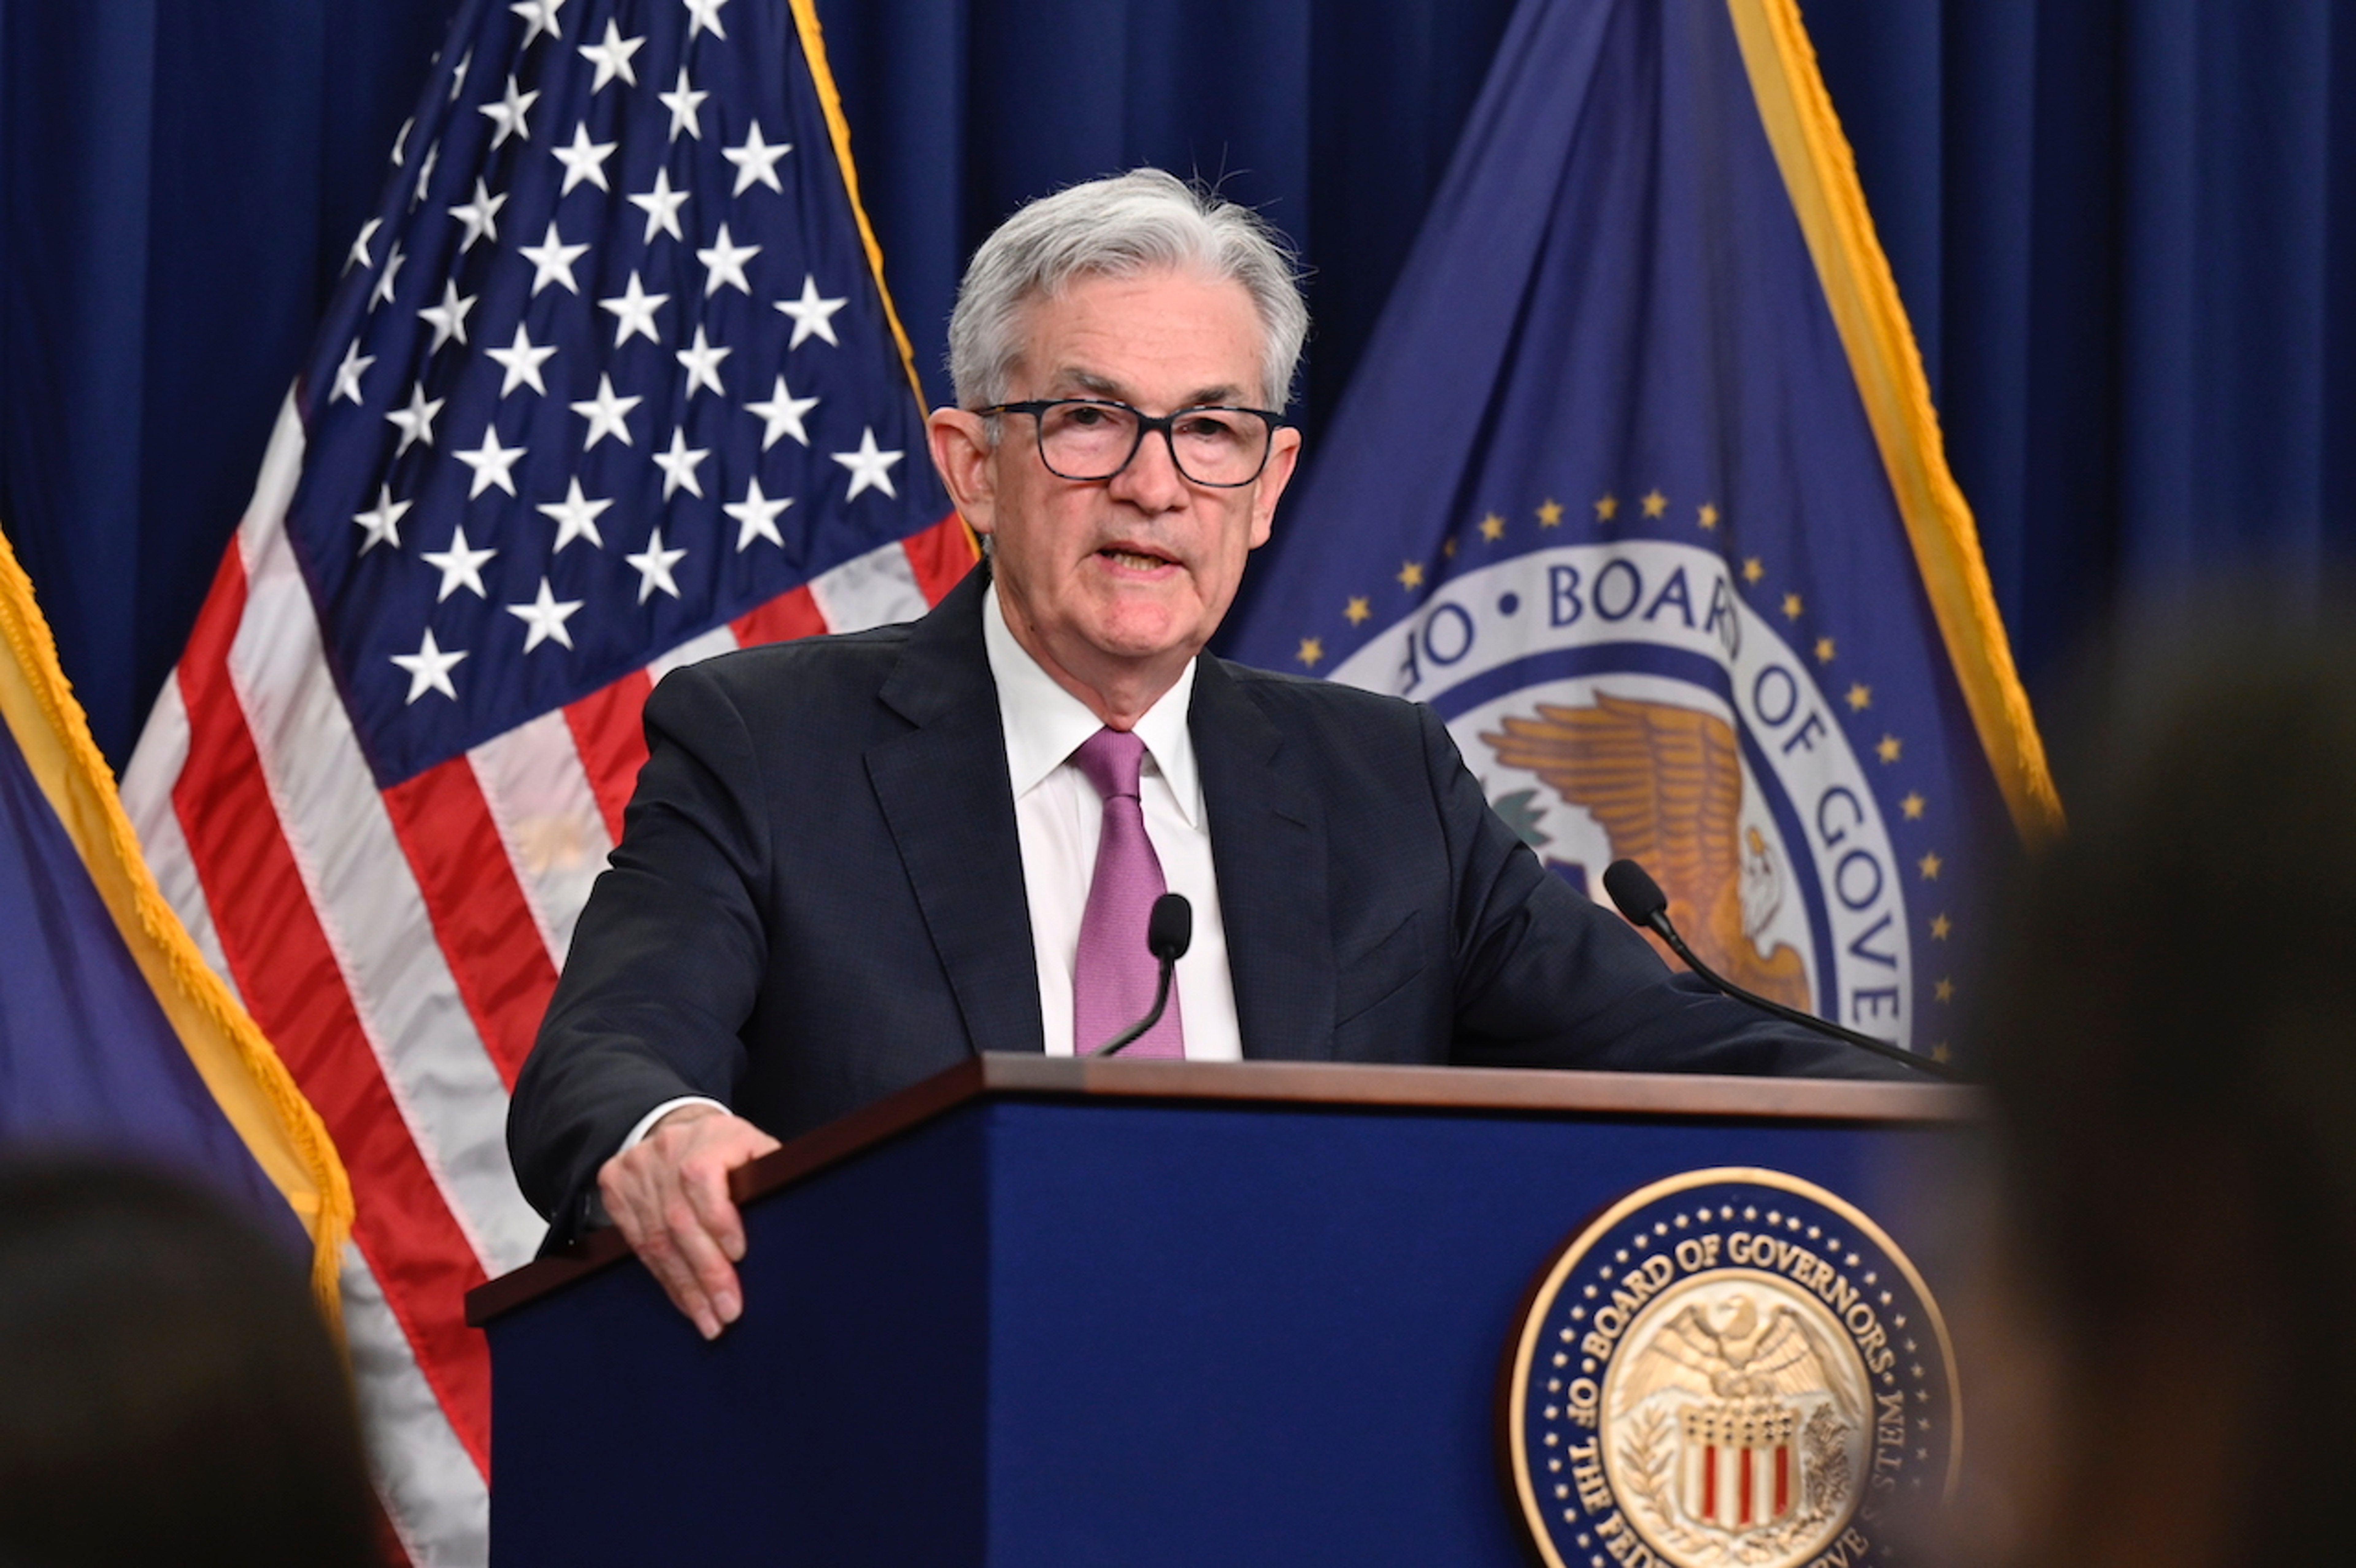 DeFi Has &#39;Significant&#39; Structural Issues, Powell Says, Calling For More Regulation